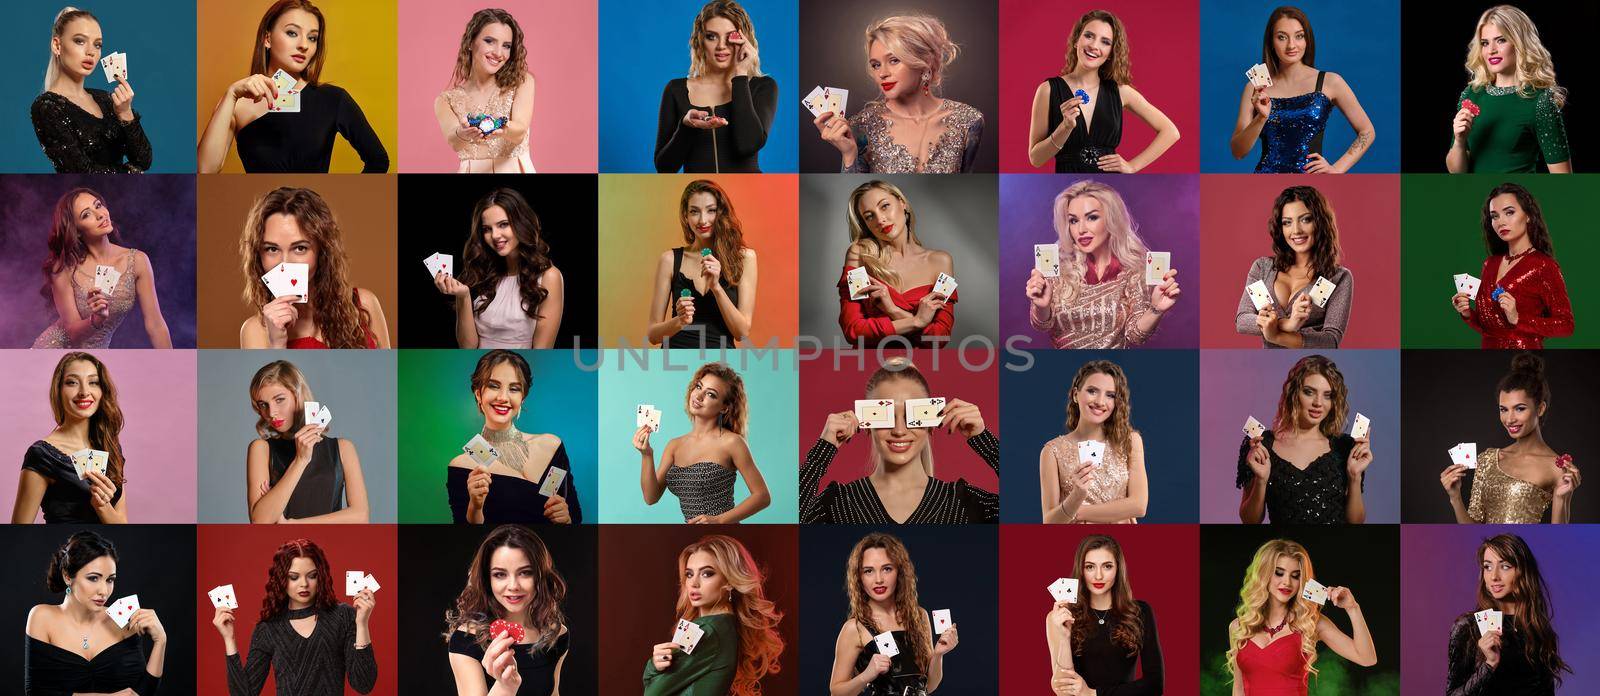 Collage of females with make-up, in stylish dresses and jewelry. They smiling, showing aces and chips, posing on colorful backgrounds. Poker, casino by nazarovsergey